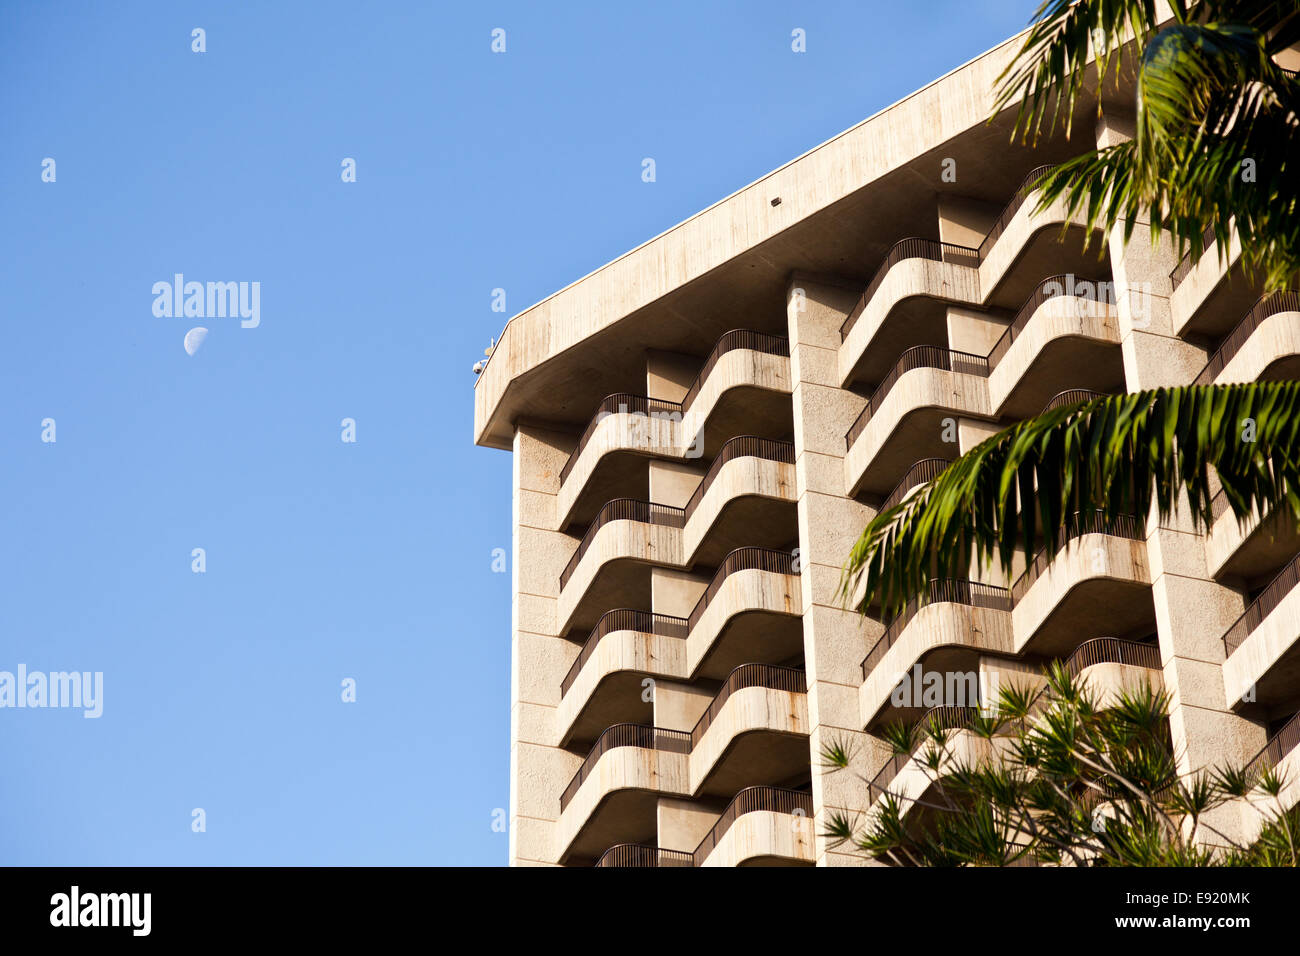 Geometric rooms in hotel facade Stock Photo